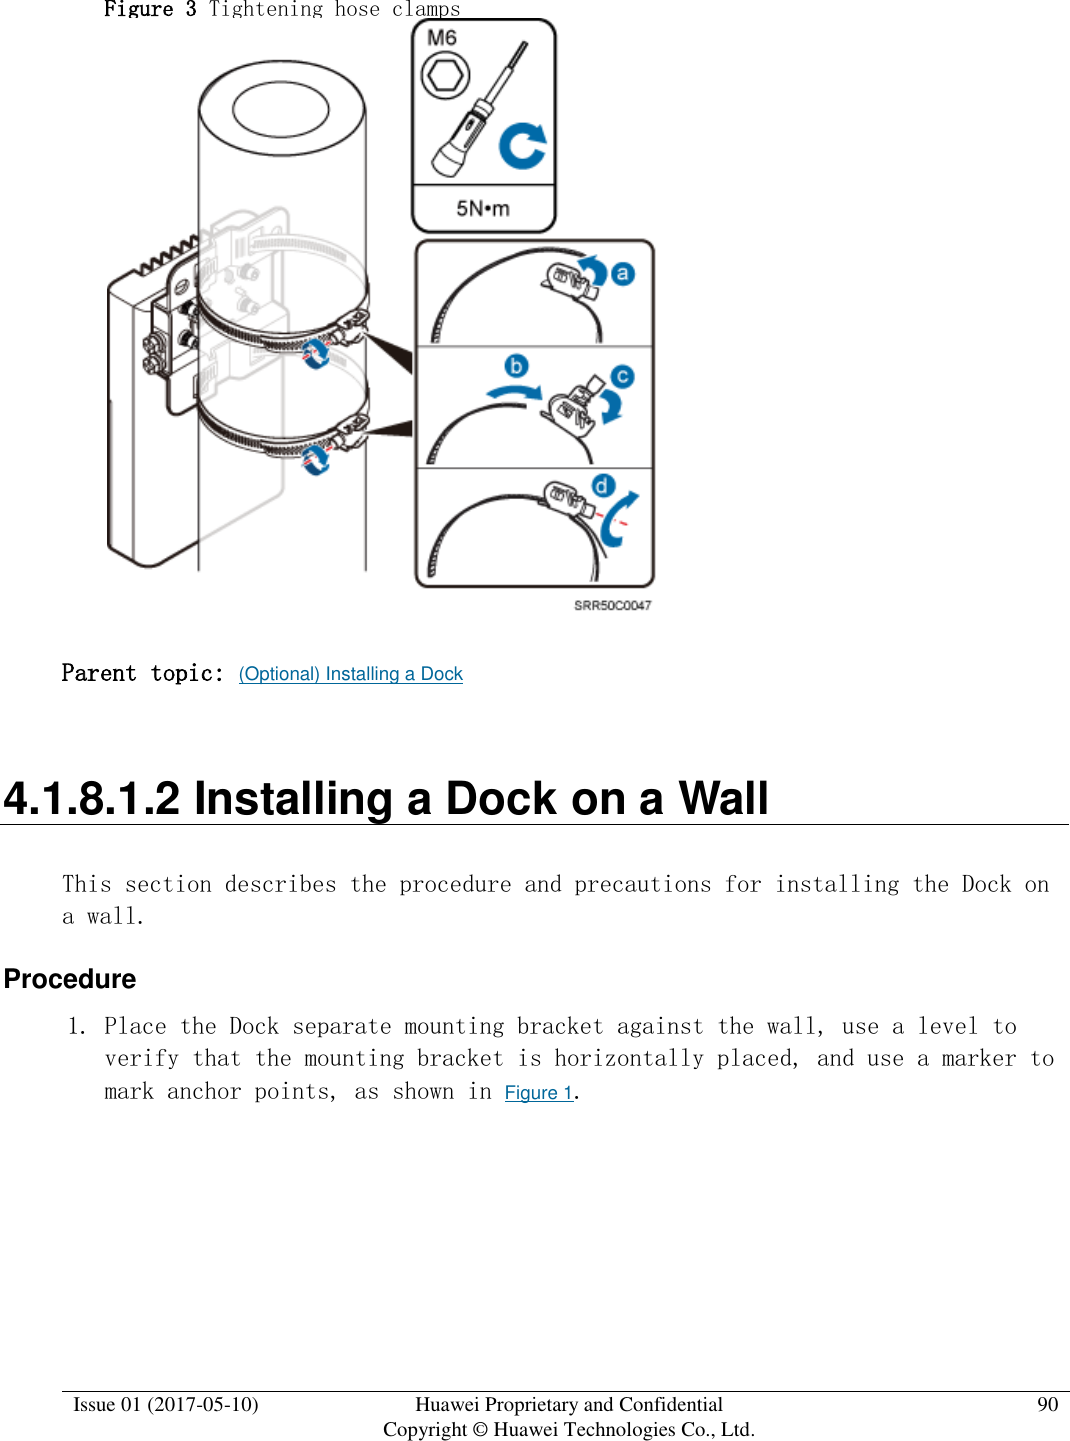  Issue 01 (2017-05-10) Huawei Proprietary and Confidential      Copyright © Huawei Technologies Co., Ltd. 90  Figure 3 Tightening hose clamps   Parent topic: (Optional) Installing a Dock 4.1.8.1.2 Installing a Dock on a Wall This section describes the procedure and precautions for installing the Dock on a wall. Procedure 1. Place the Dock separate mounting bracket against the wall, use a level to verify that the mounting bracket is horizontally placed, and use a marker to mark anchor points, as shown in Figure 1.  